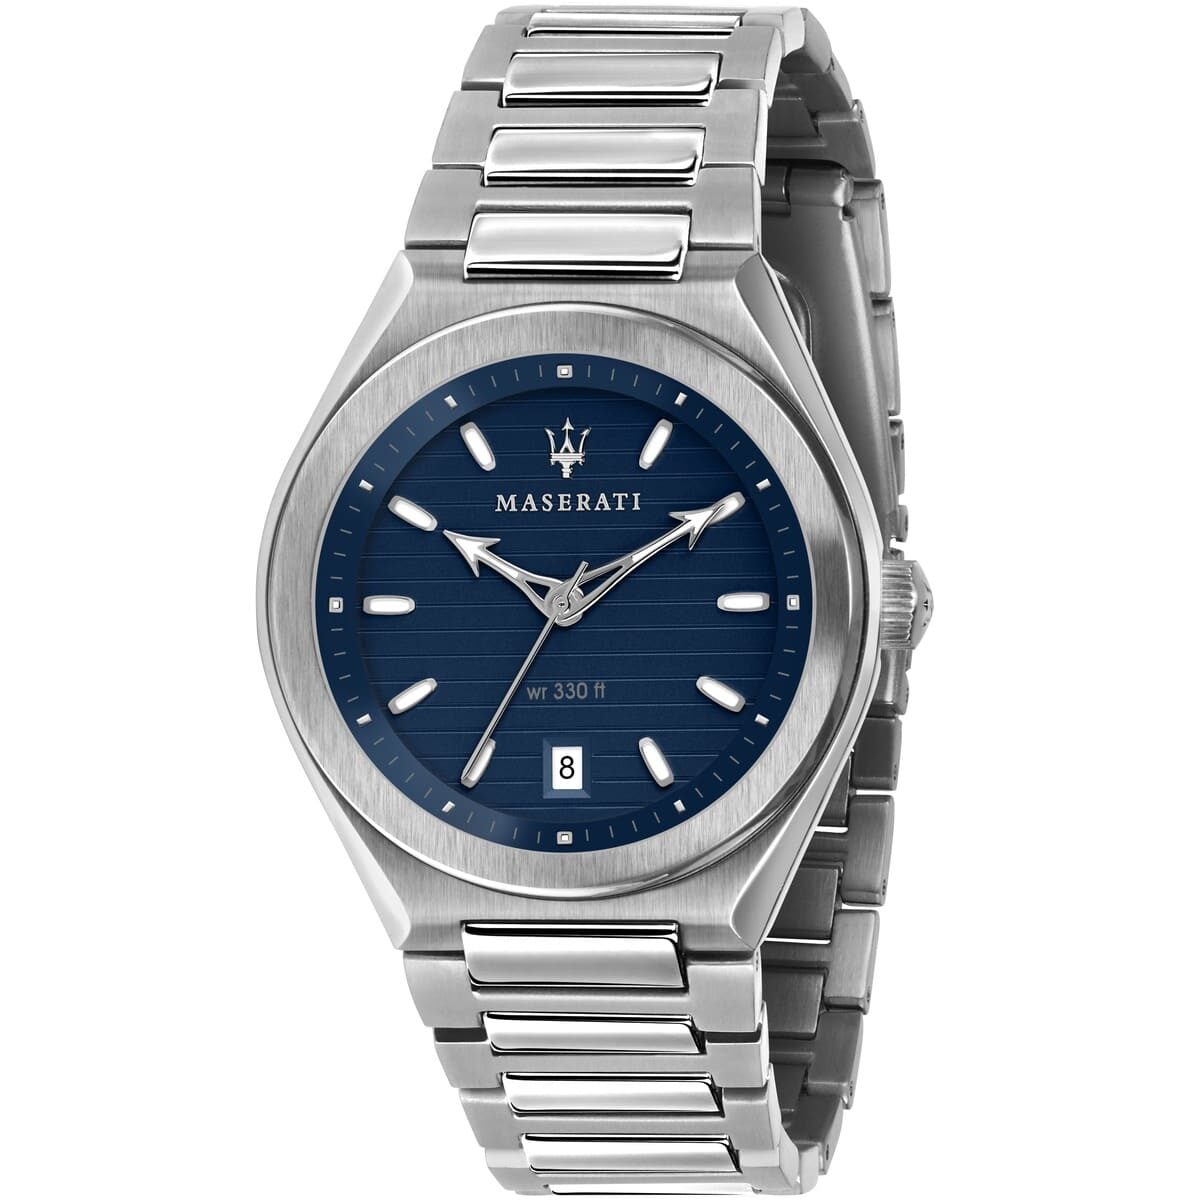 r8853139002-maserati-watch-men-blue-dial-metal-stainless-steel-silver-strap-quartz-battery-analog-three-hand-wr-330-ft-triconic